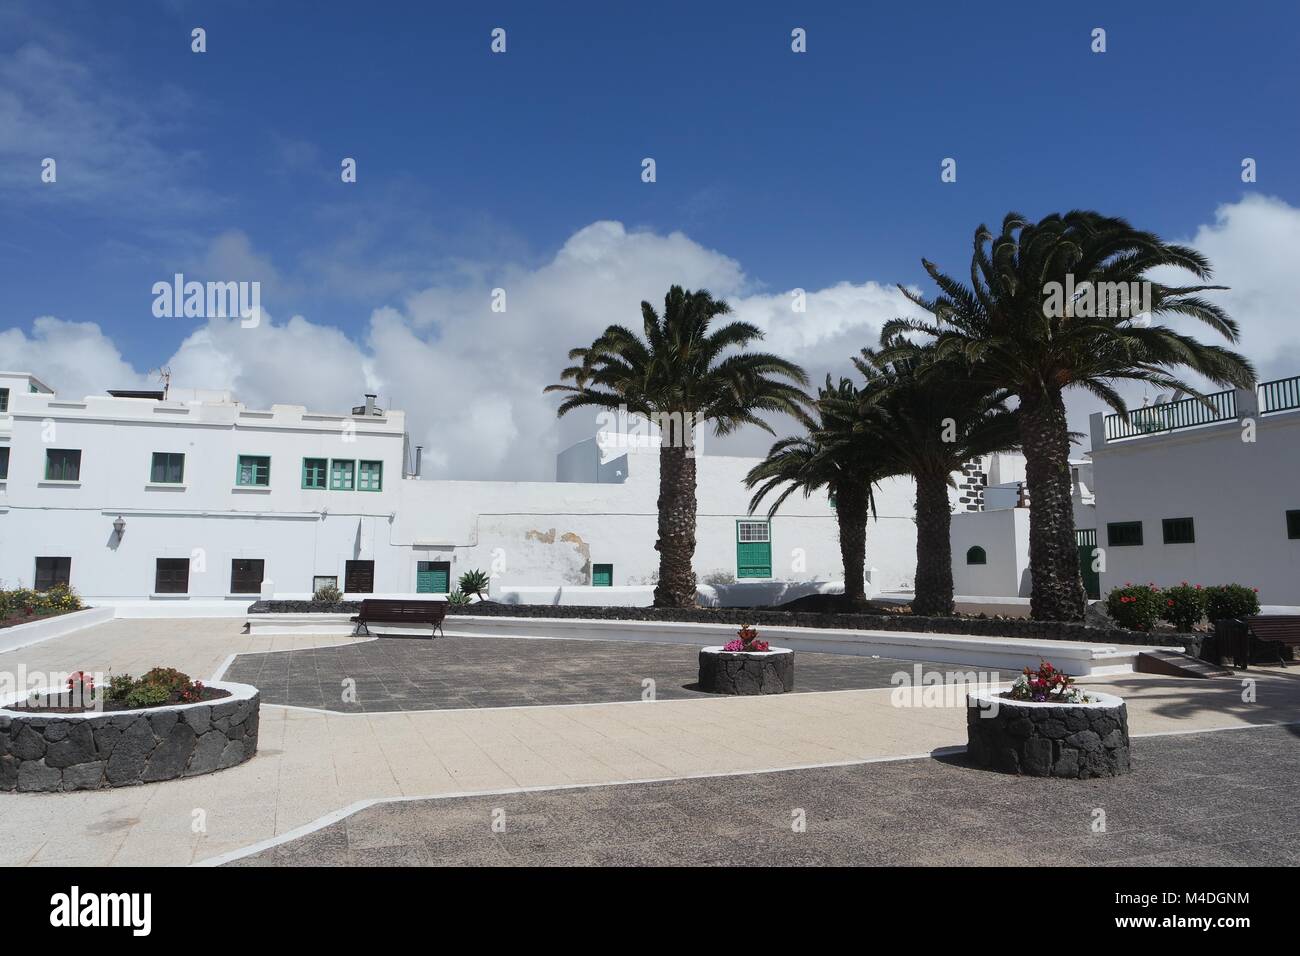 Place in Teguise, Lanzarote Stock Photo